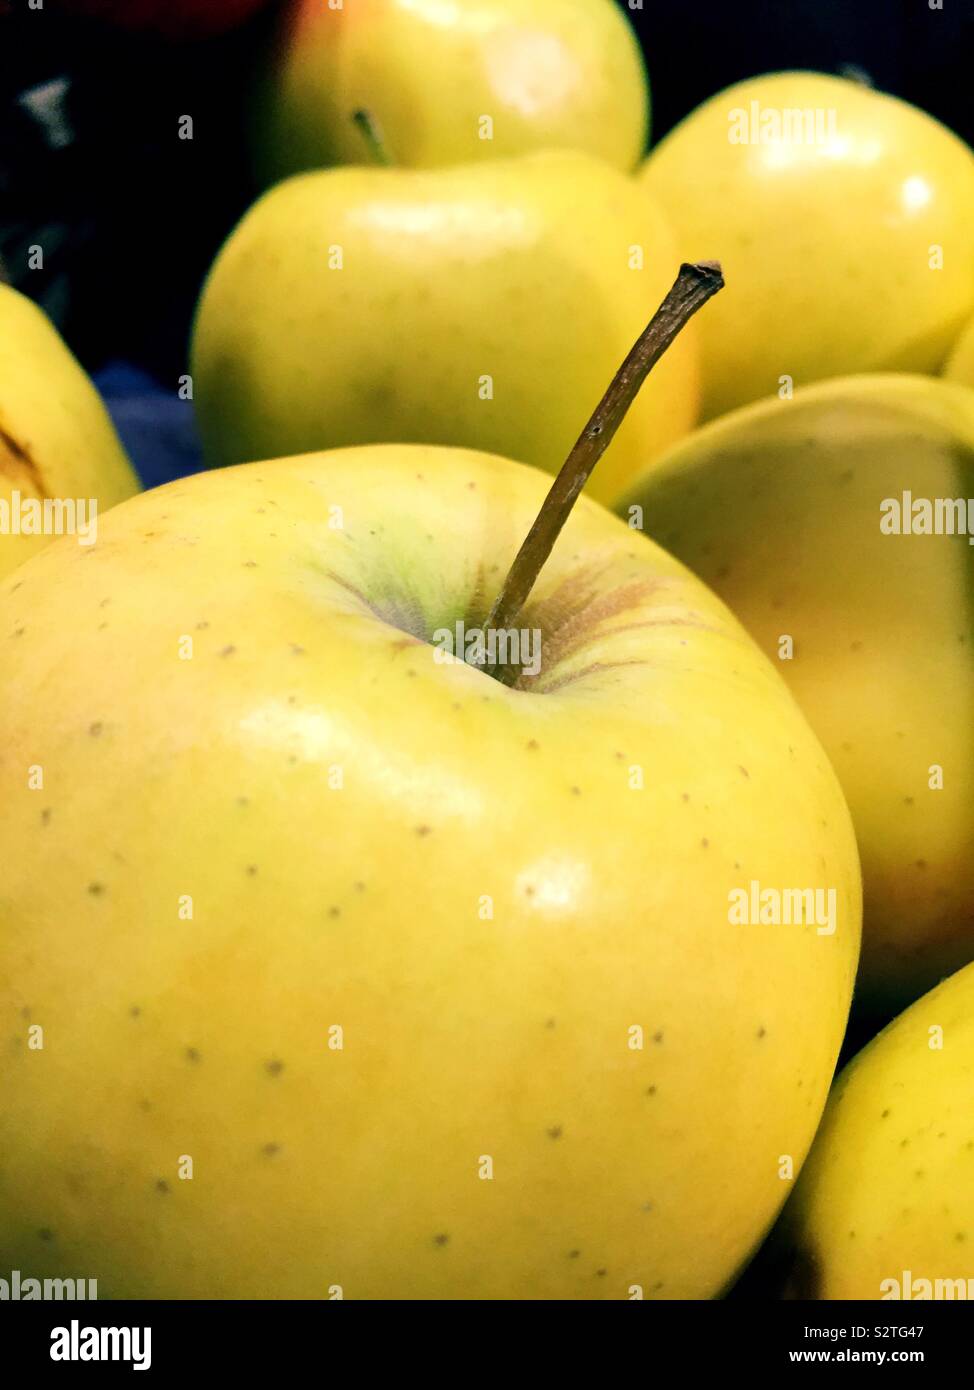 Golden delicious apple Close up Stock Photo